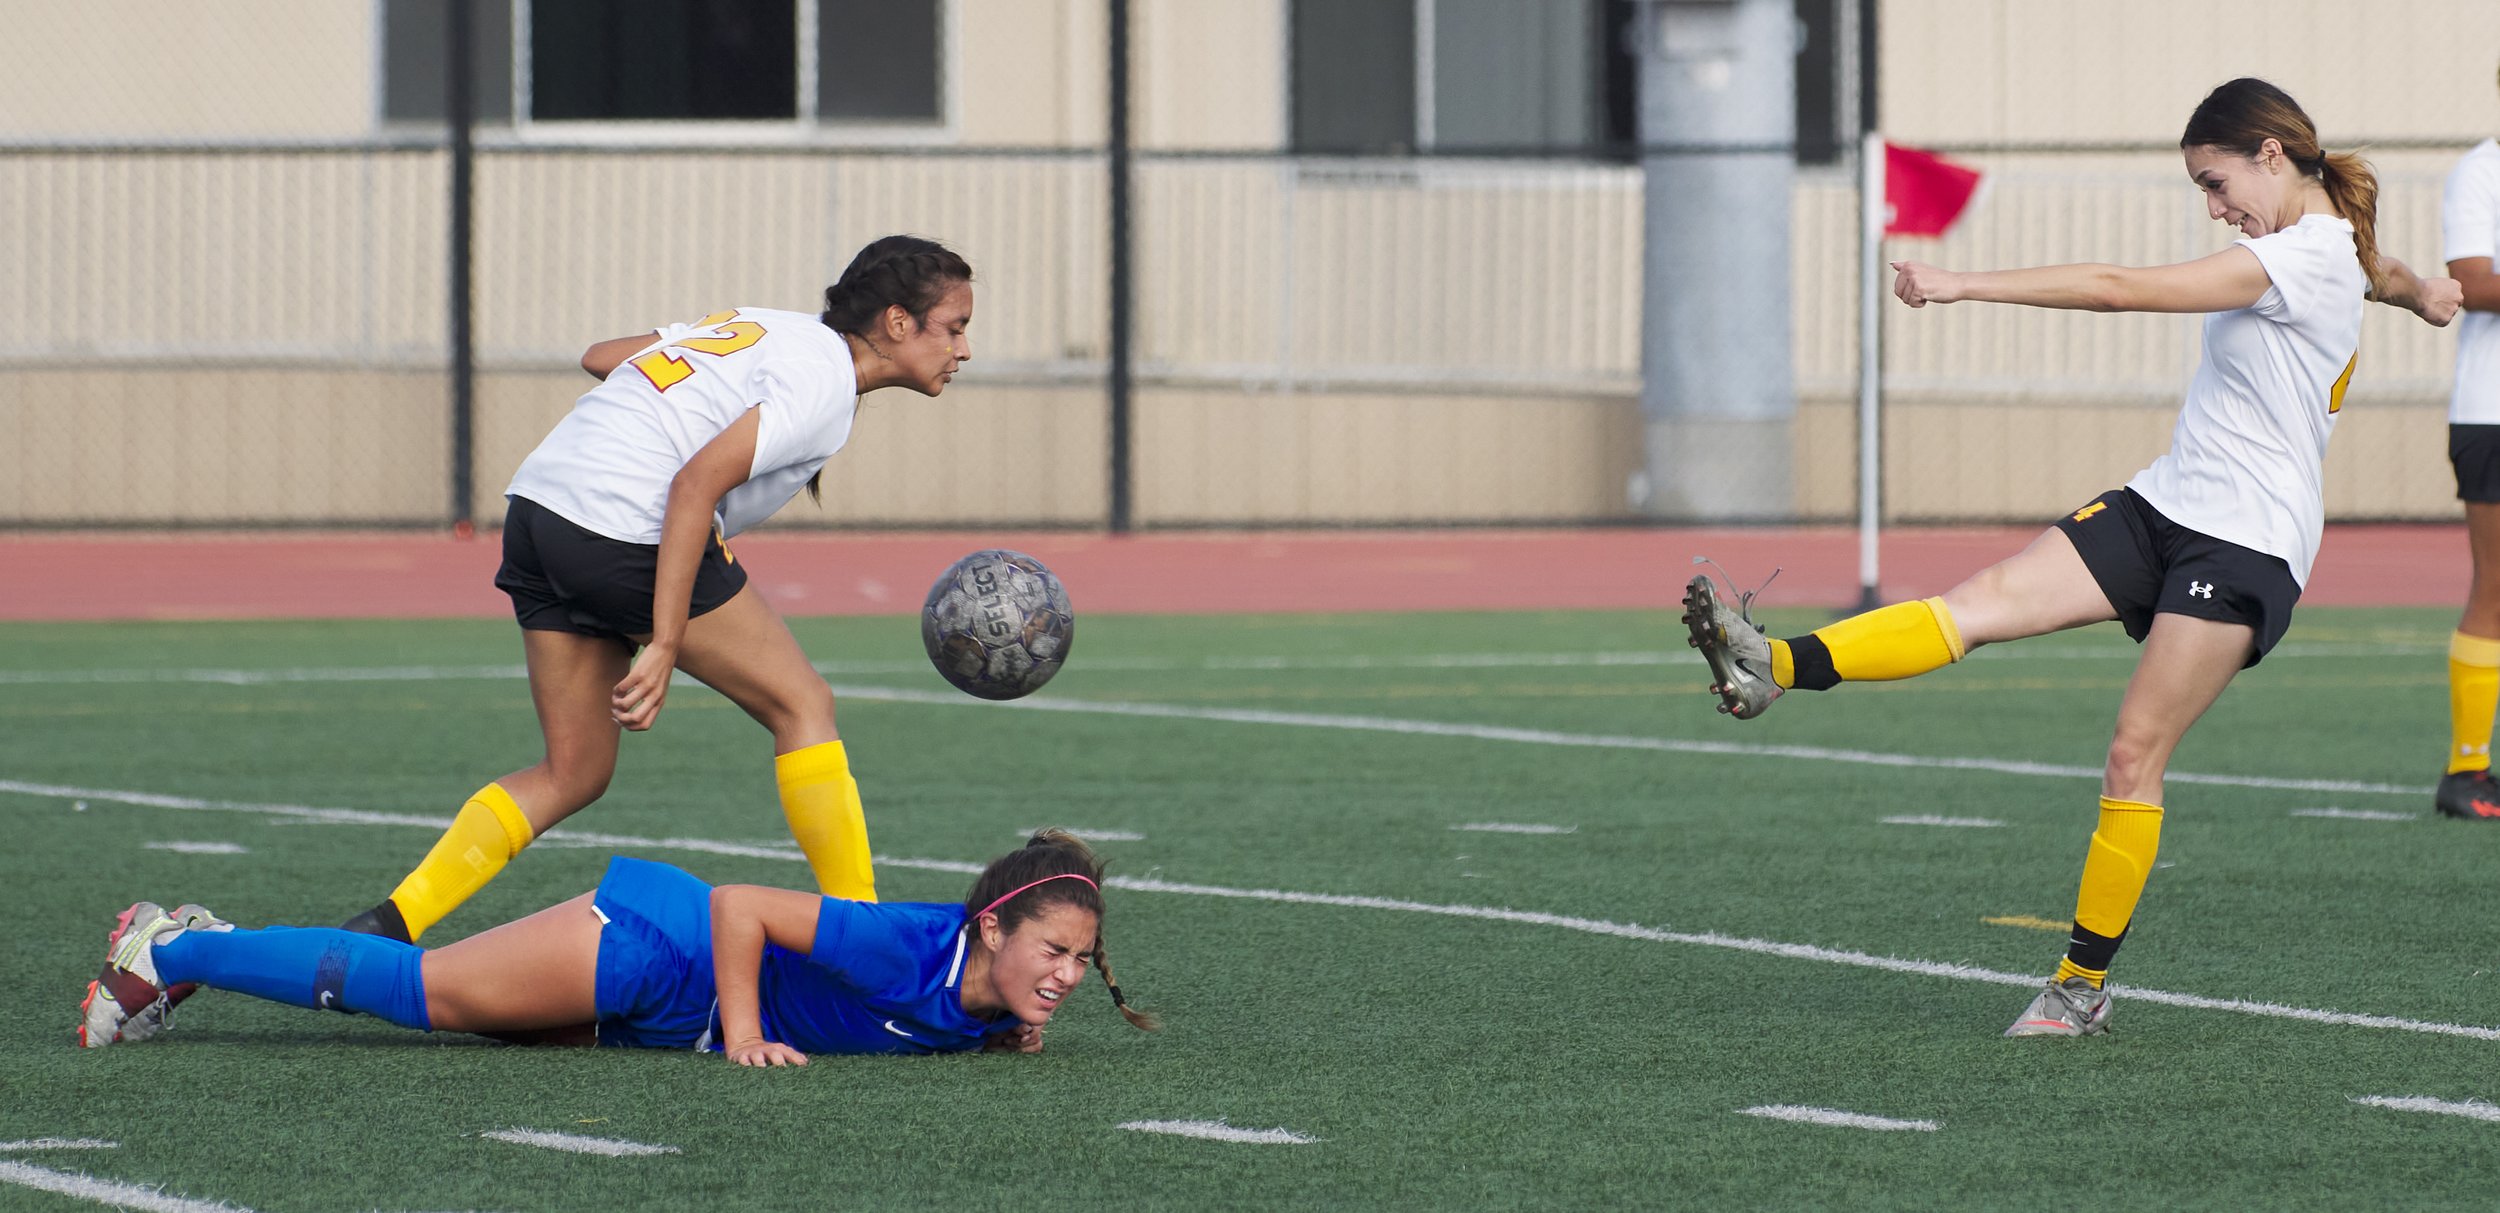  Santa Monica College Corsairs' Ali Alban falls to the ground from a foul by Glendale Community College Vaqueros' Santi Eldimiri, while fellow Vaquero Luisa Salsedo kicks the ball during the women's soccer match on Friday, Oct. 21, 2022, at Corsair F